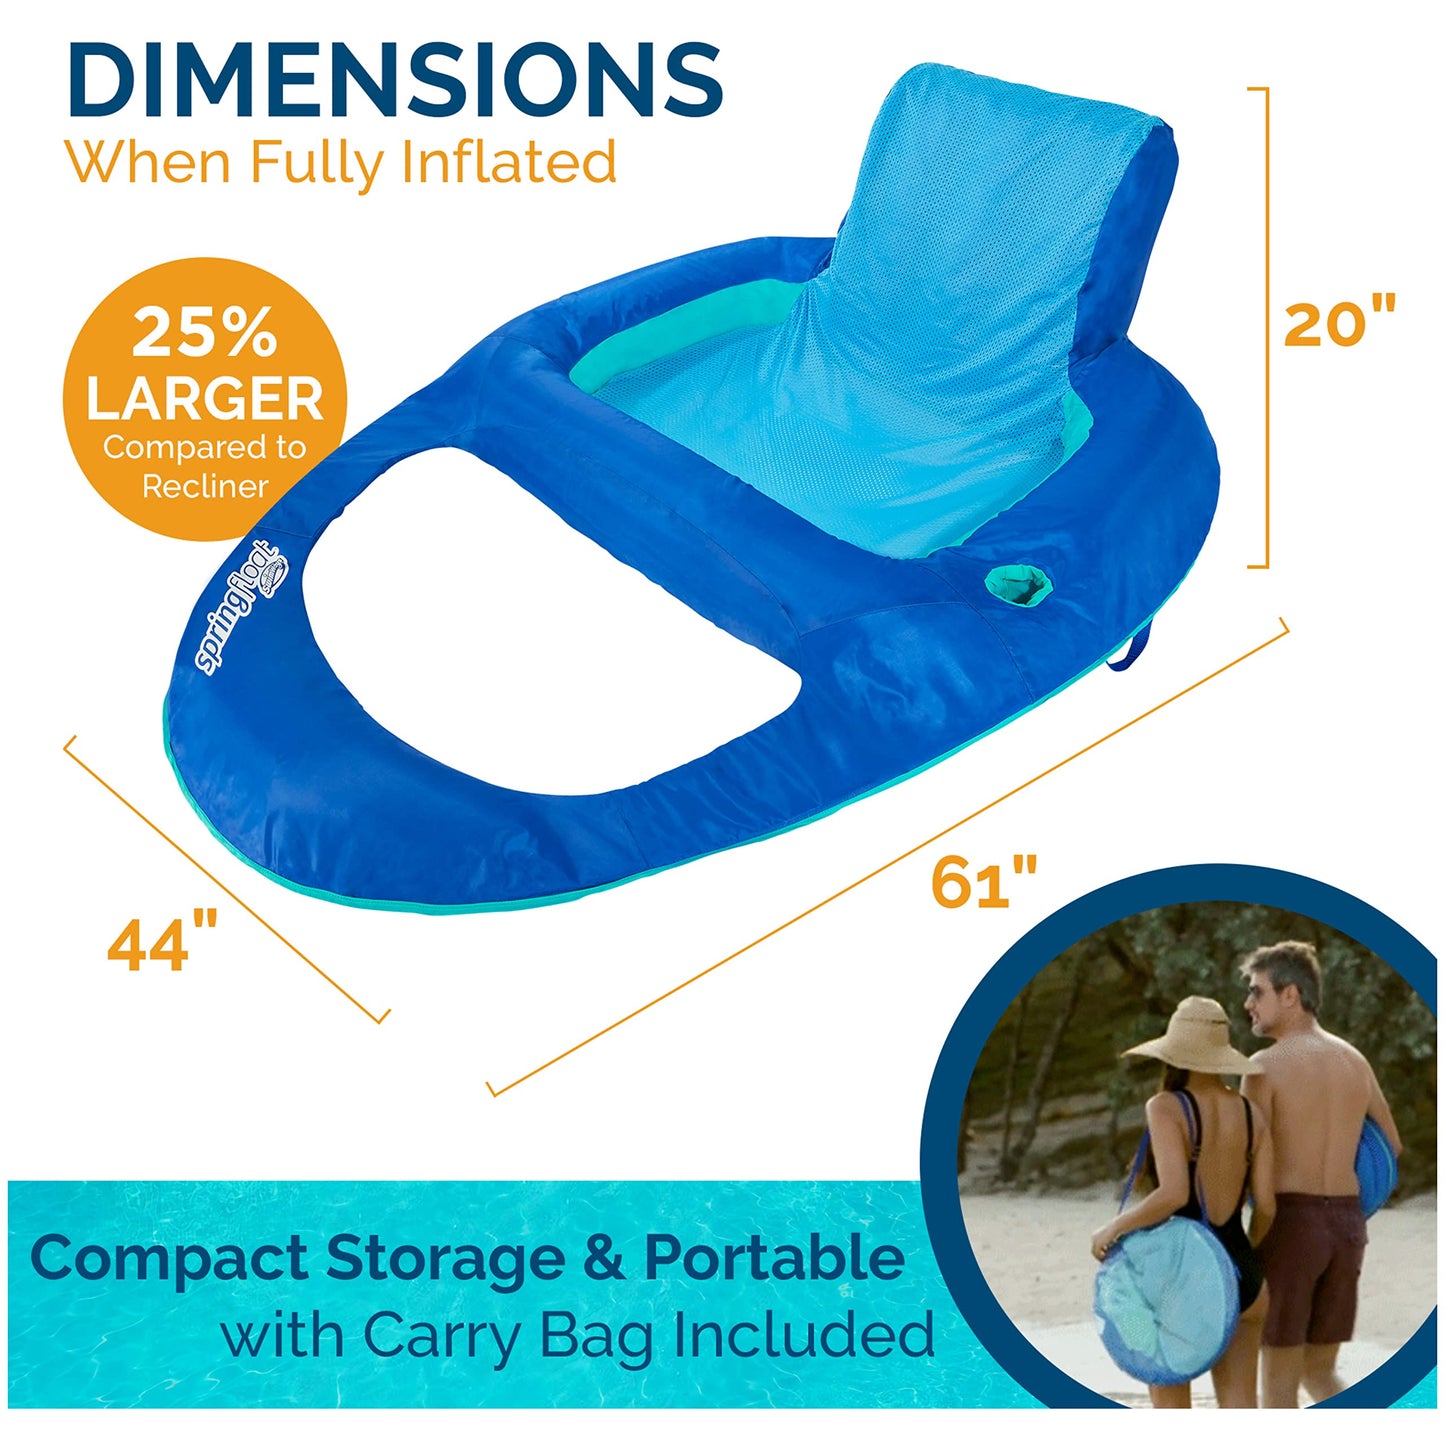 SwimWays Spring Float XL Recliner Pool Lounge Chair with Hyper-Flate Valve, 25% Larger than Spring Float Recliner, Blue